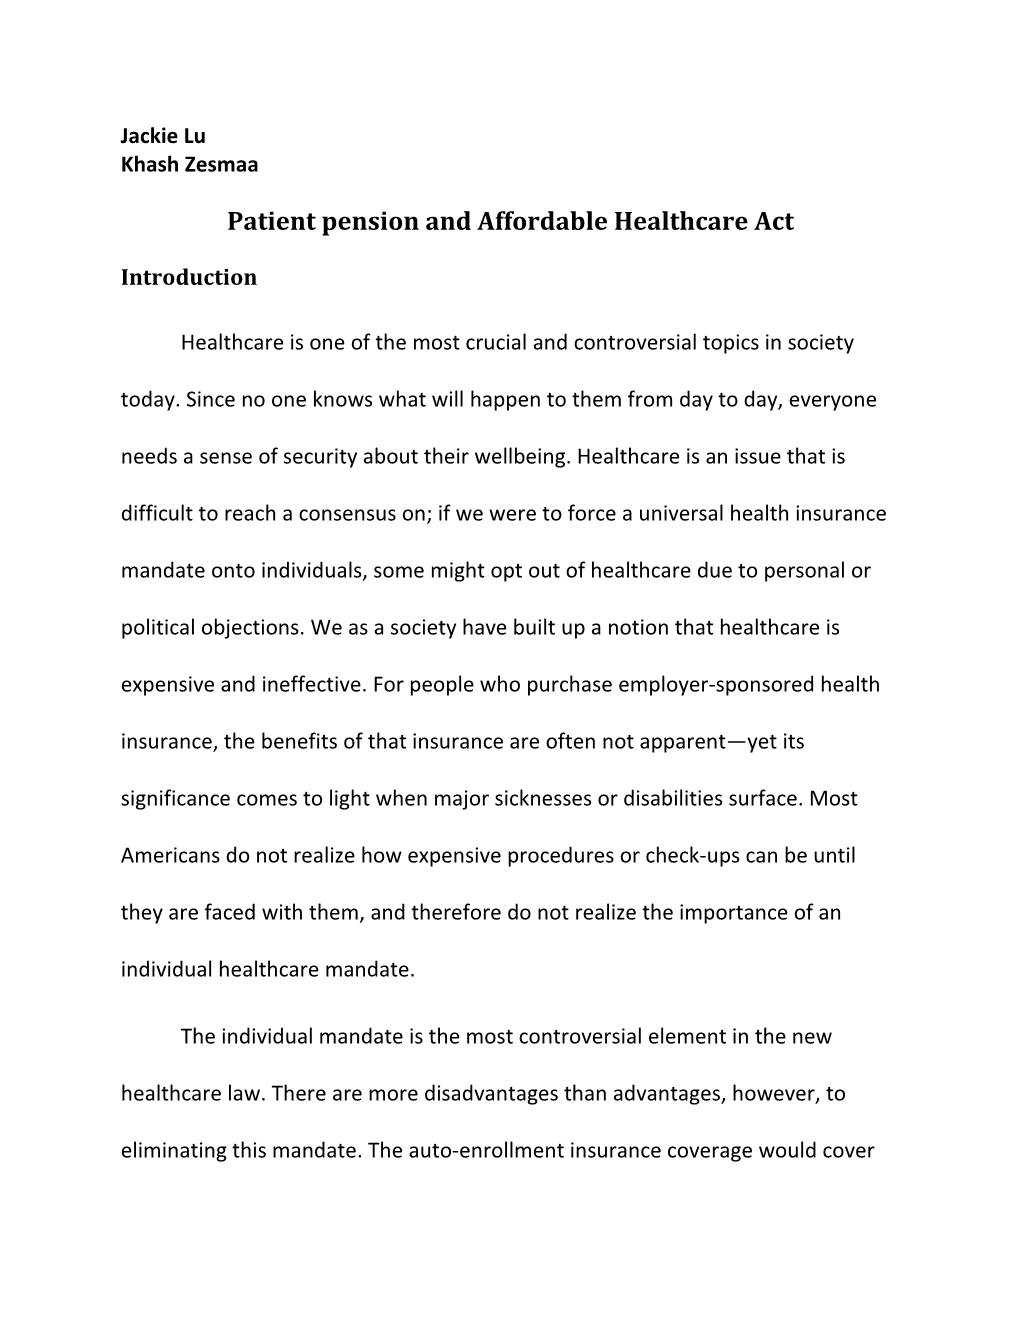 Patient Pension and Affordable Healthcare Act